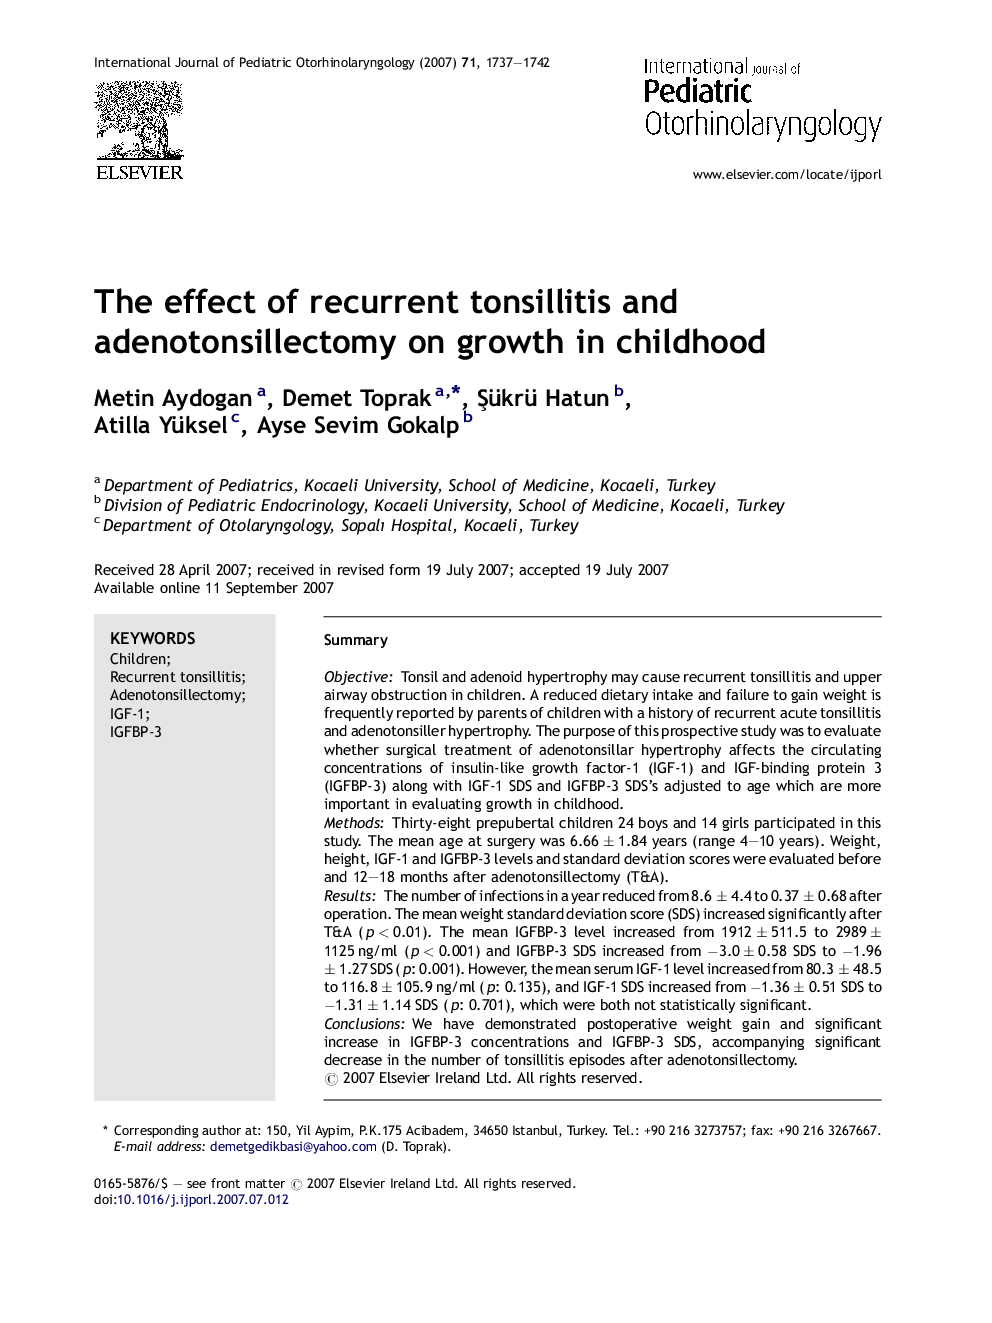 The effect of recurrent tonsillitis and adenotonsillectomy on growth in childhood